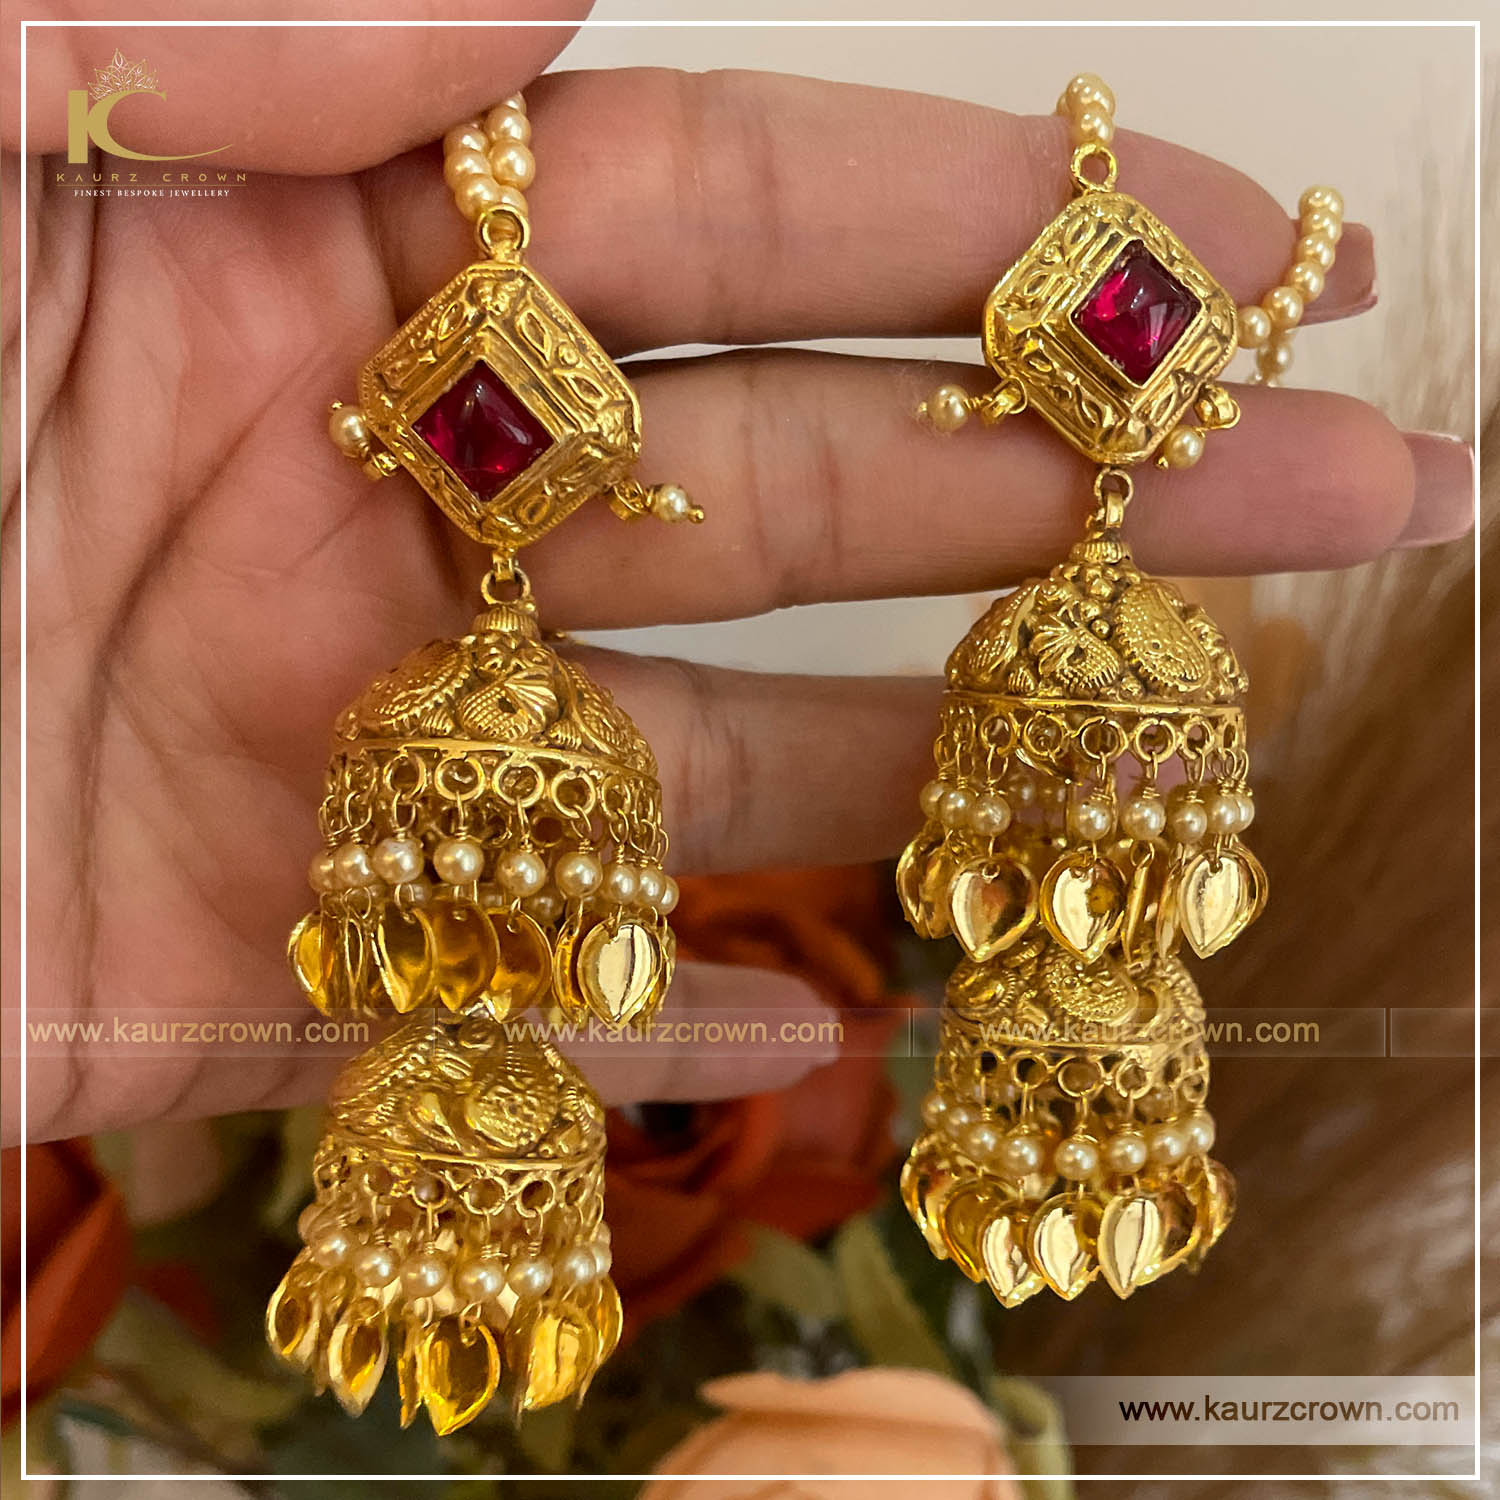 Punjabi Traditional Jewellery - featured:- Gold Finished Pippal Patti Tika  & Earrings Set • • • You may also DM us OR contact us at +91 9914721111 to  buy.⠀ •••••••••••••••••••••••••••••••••••••••••••••••••••••⠀ Image  copyright ©